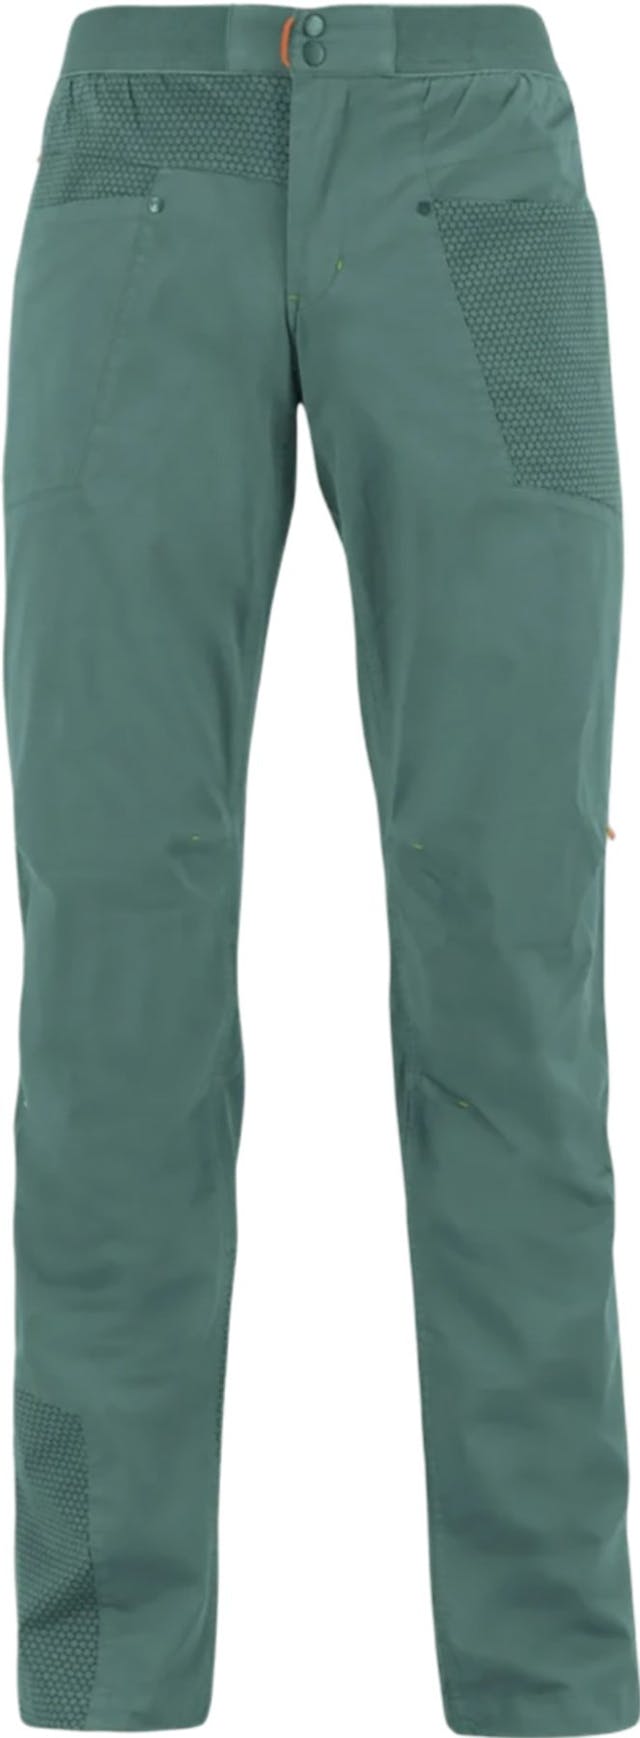 Product image for Faggio Pant - Men’s